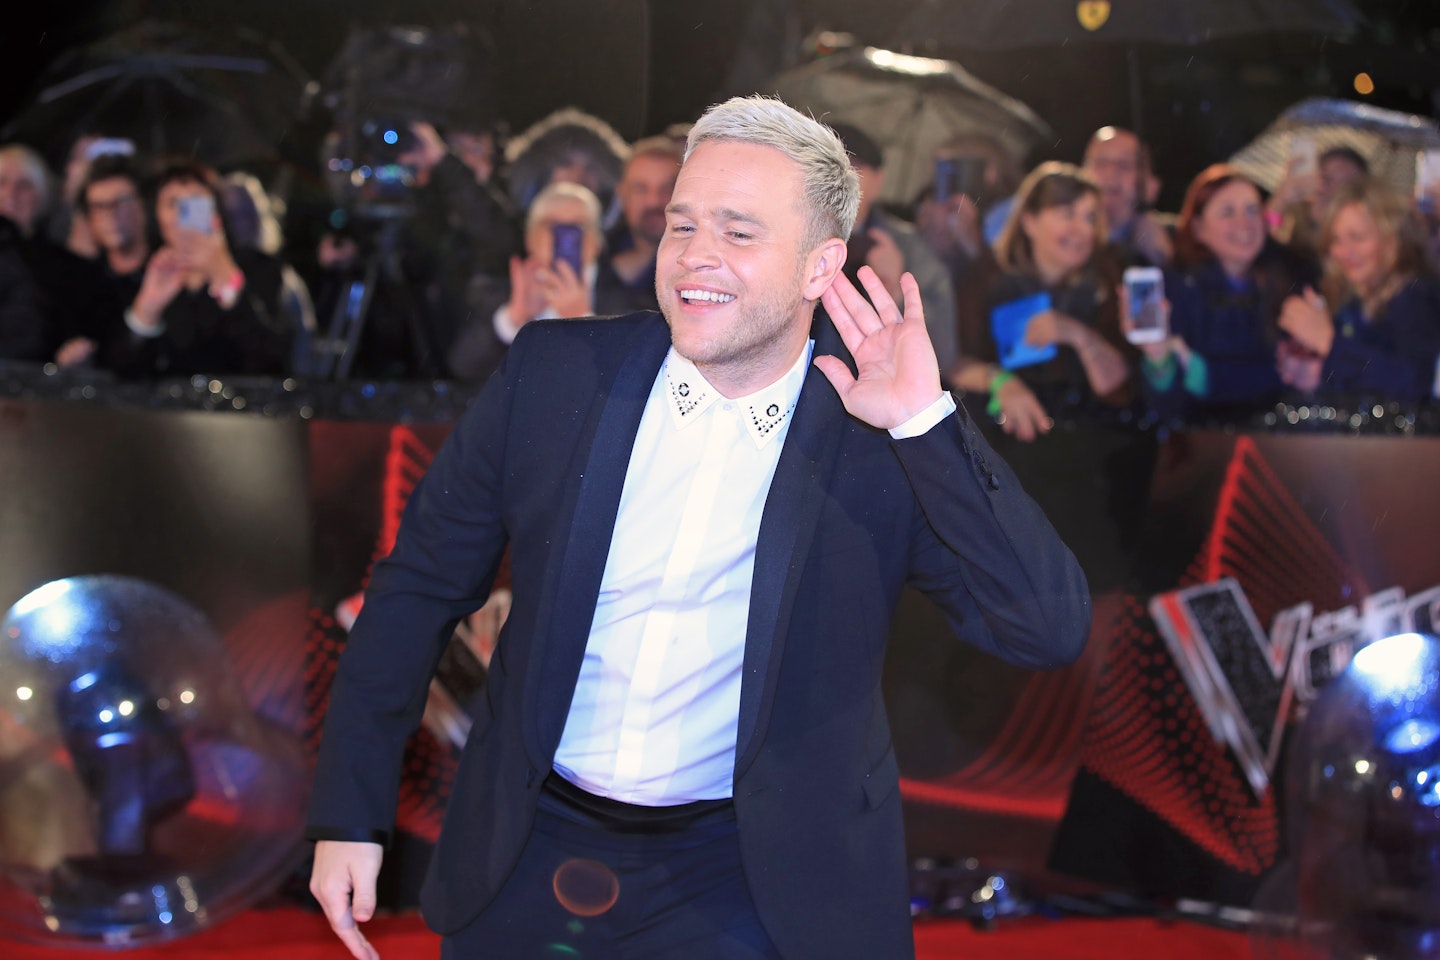 Olly Murs showing off his new blond hair at The Voice UK launch